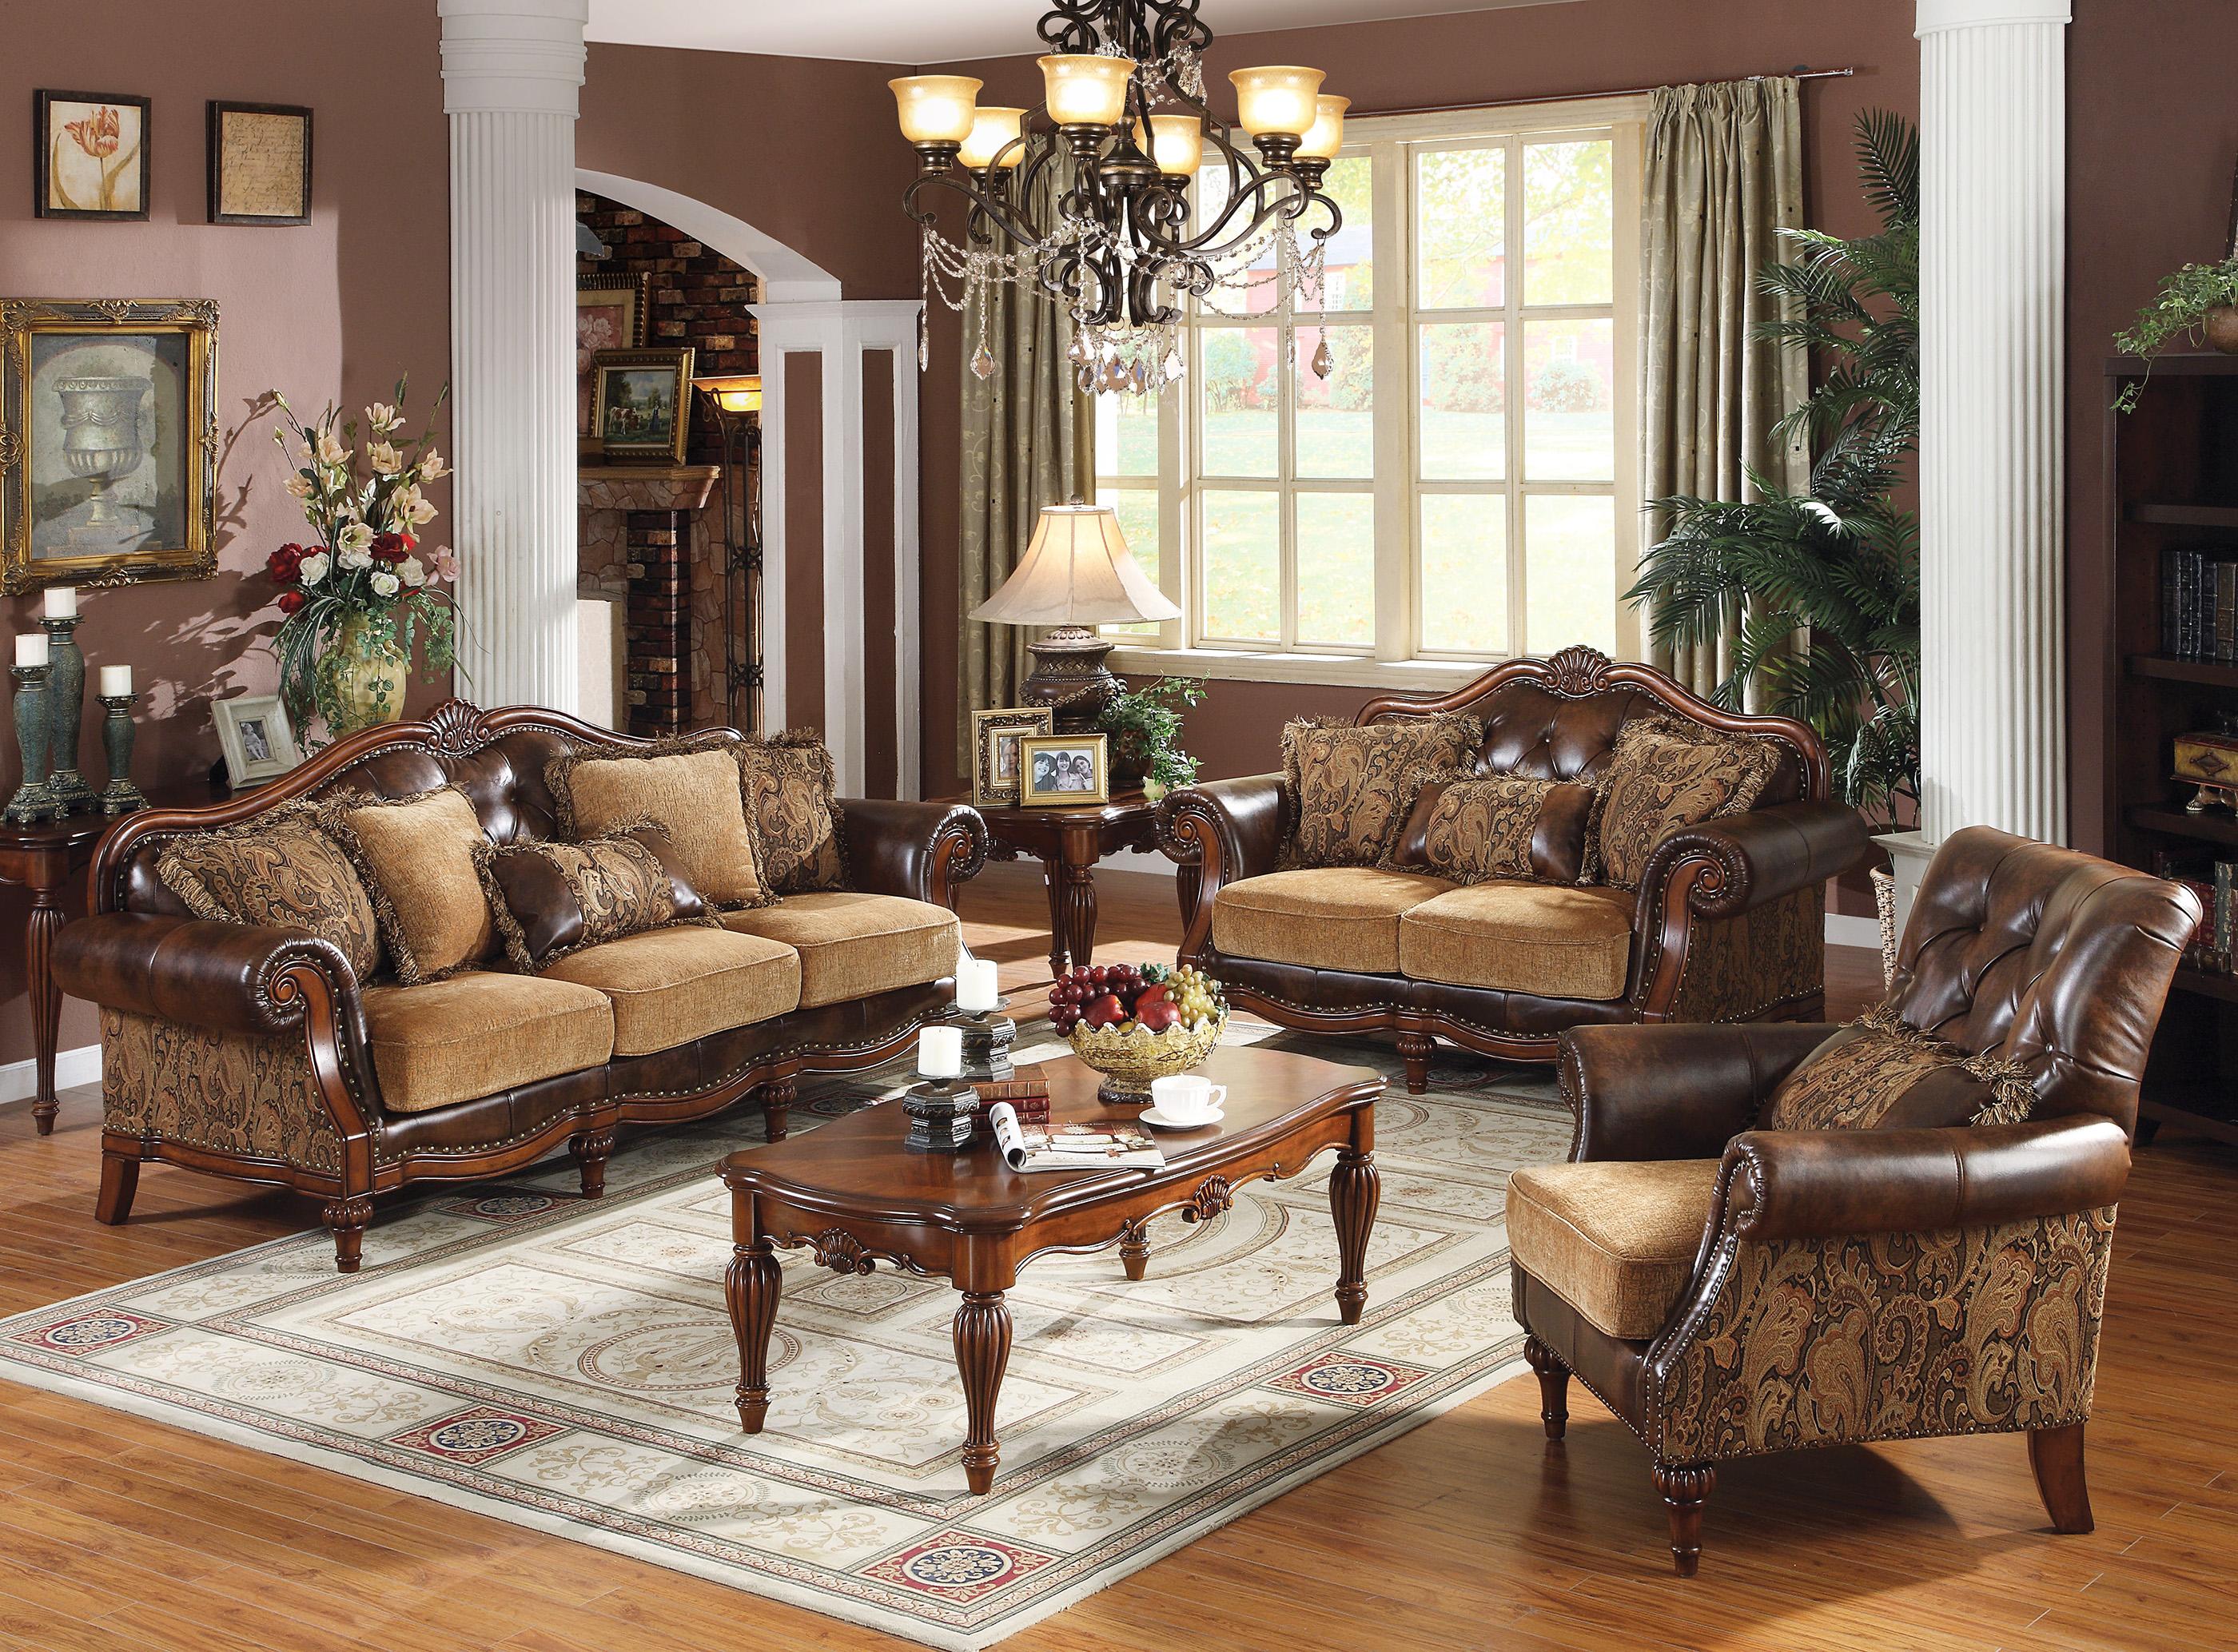 

        
Acme Furniture Dreena 05495 Sofa and Loveseat Set Cherry/Brown Bonded Leather 00840412054952
